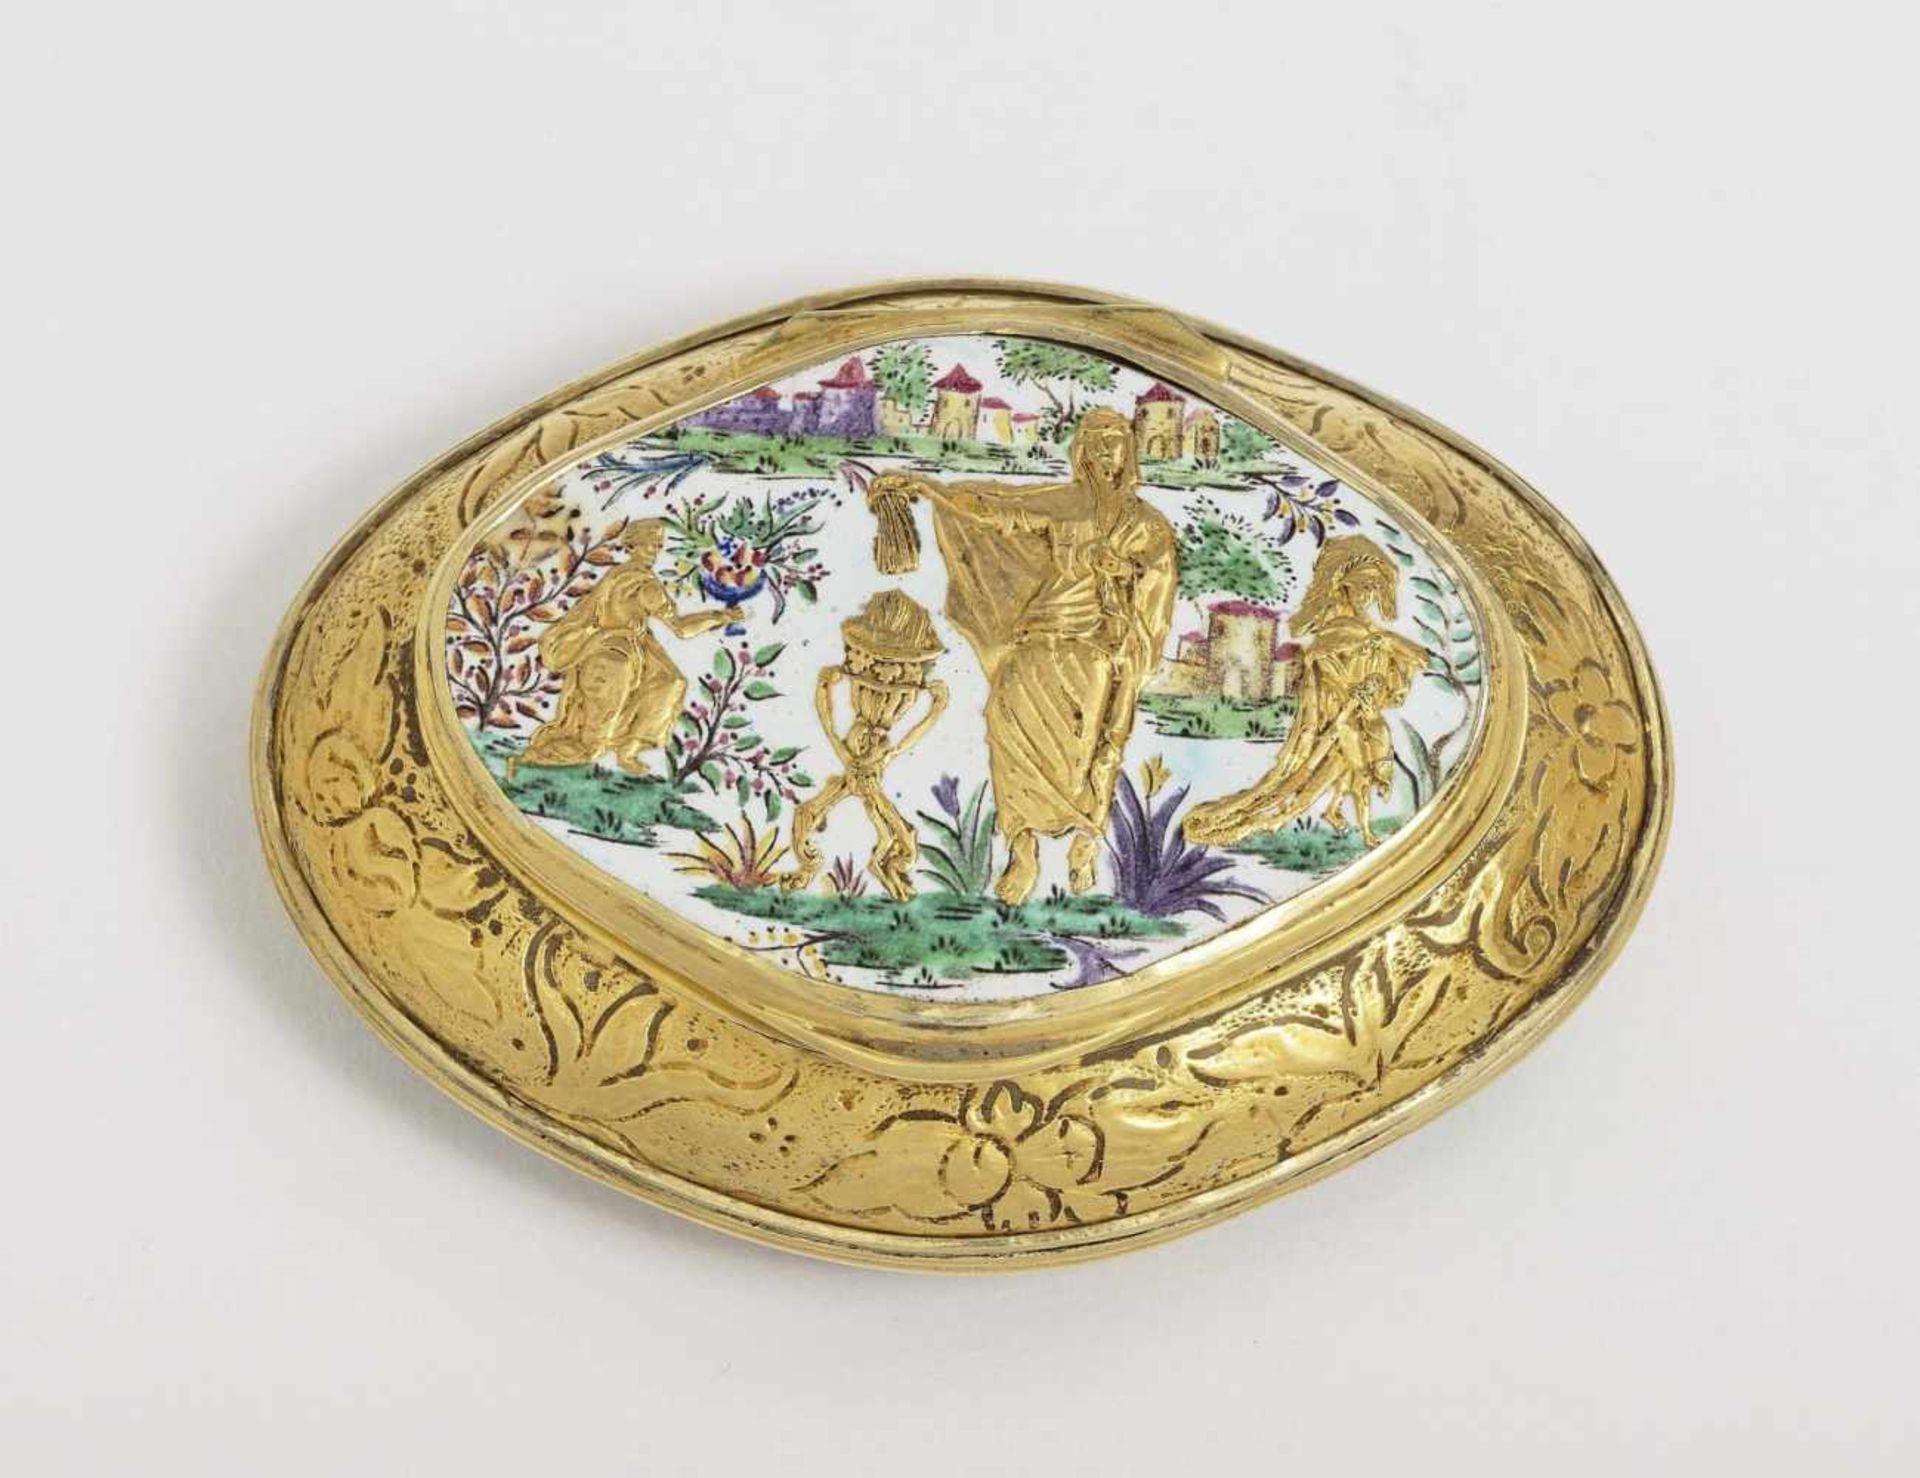 A Snuff BoxBerlin or Meißen, 2nd third of the 18th Century, probably workshop of Fromery 'Email de